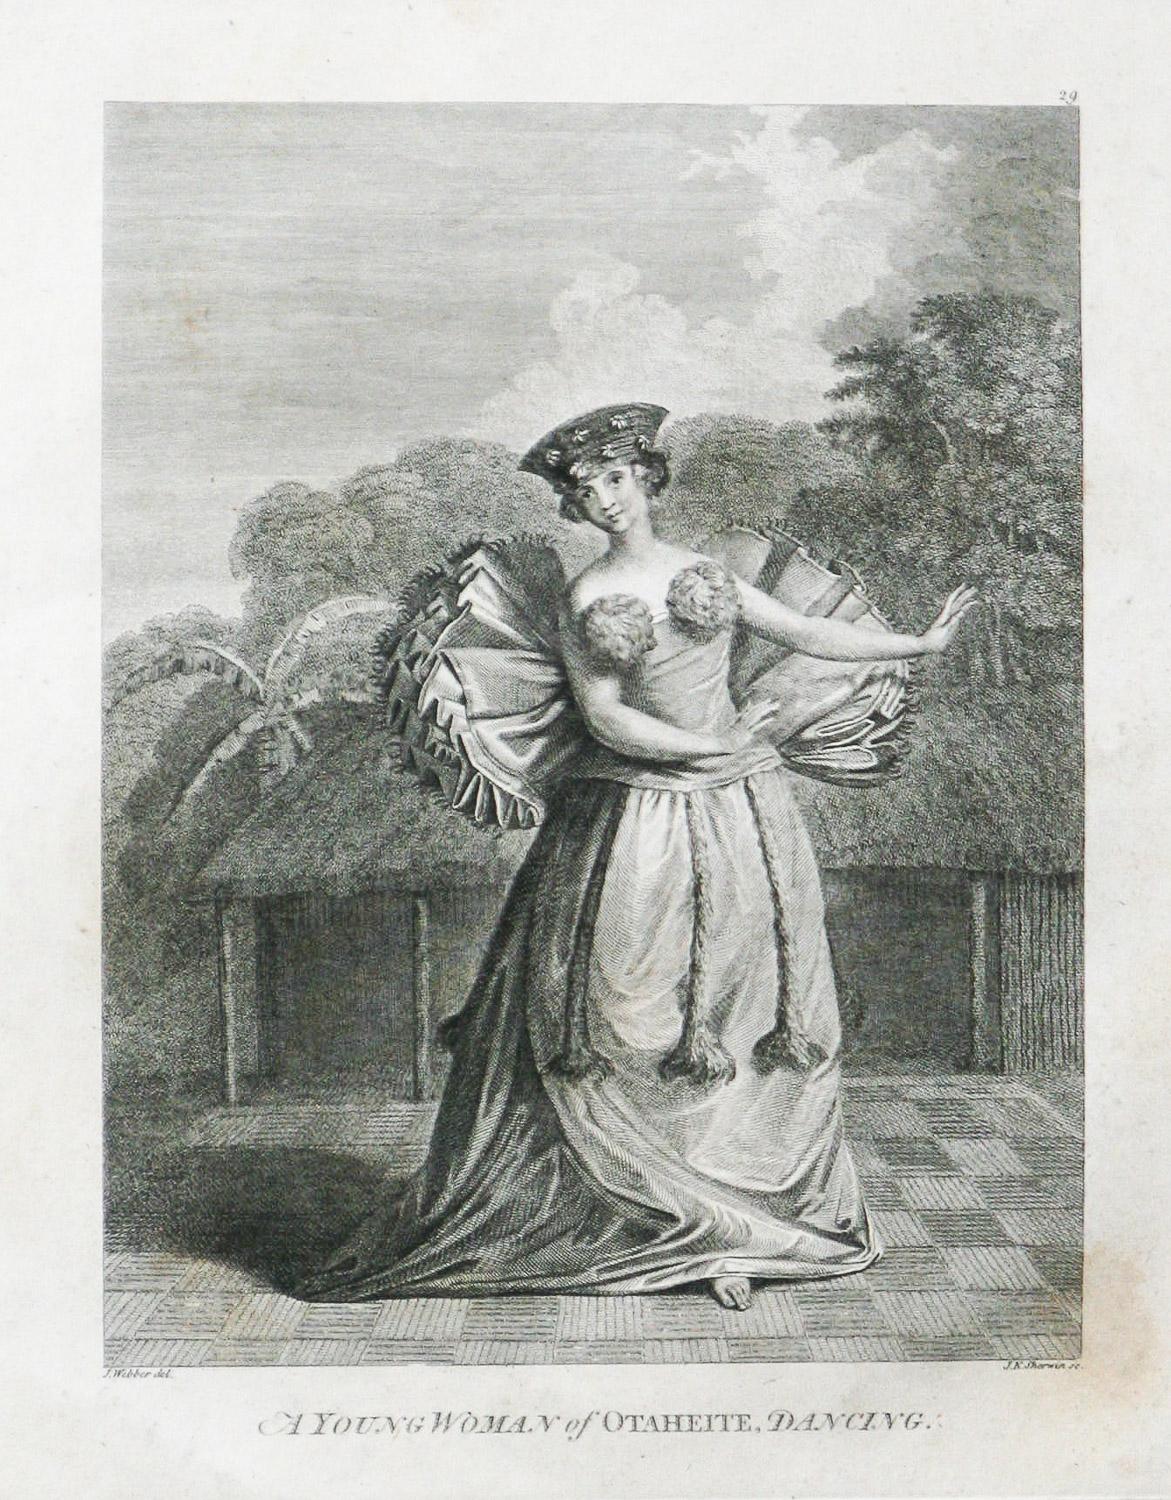 John Webber Portrait Print - A Young Woman of Otaheite, Dancing (Tahiti) 1784 Captain Cooks Voyage by Webber